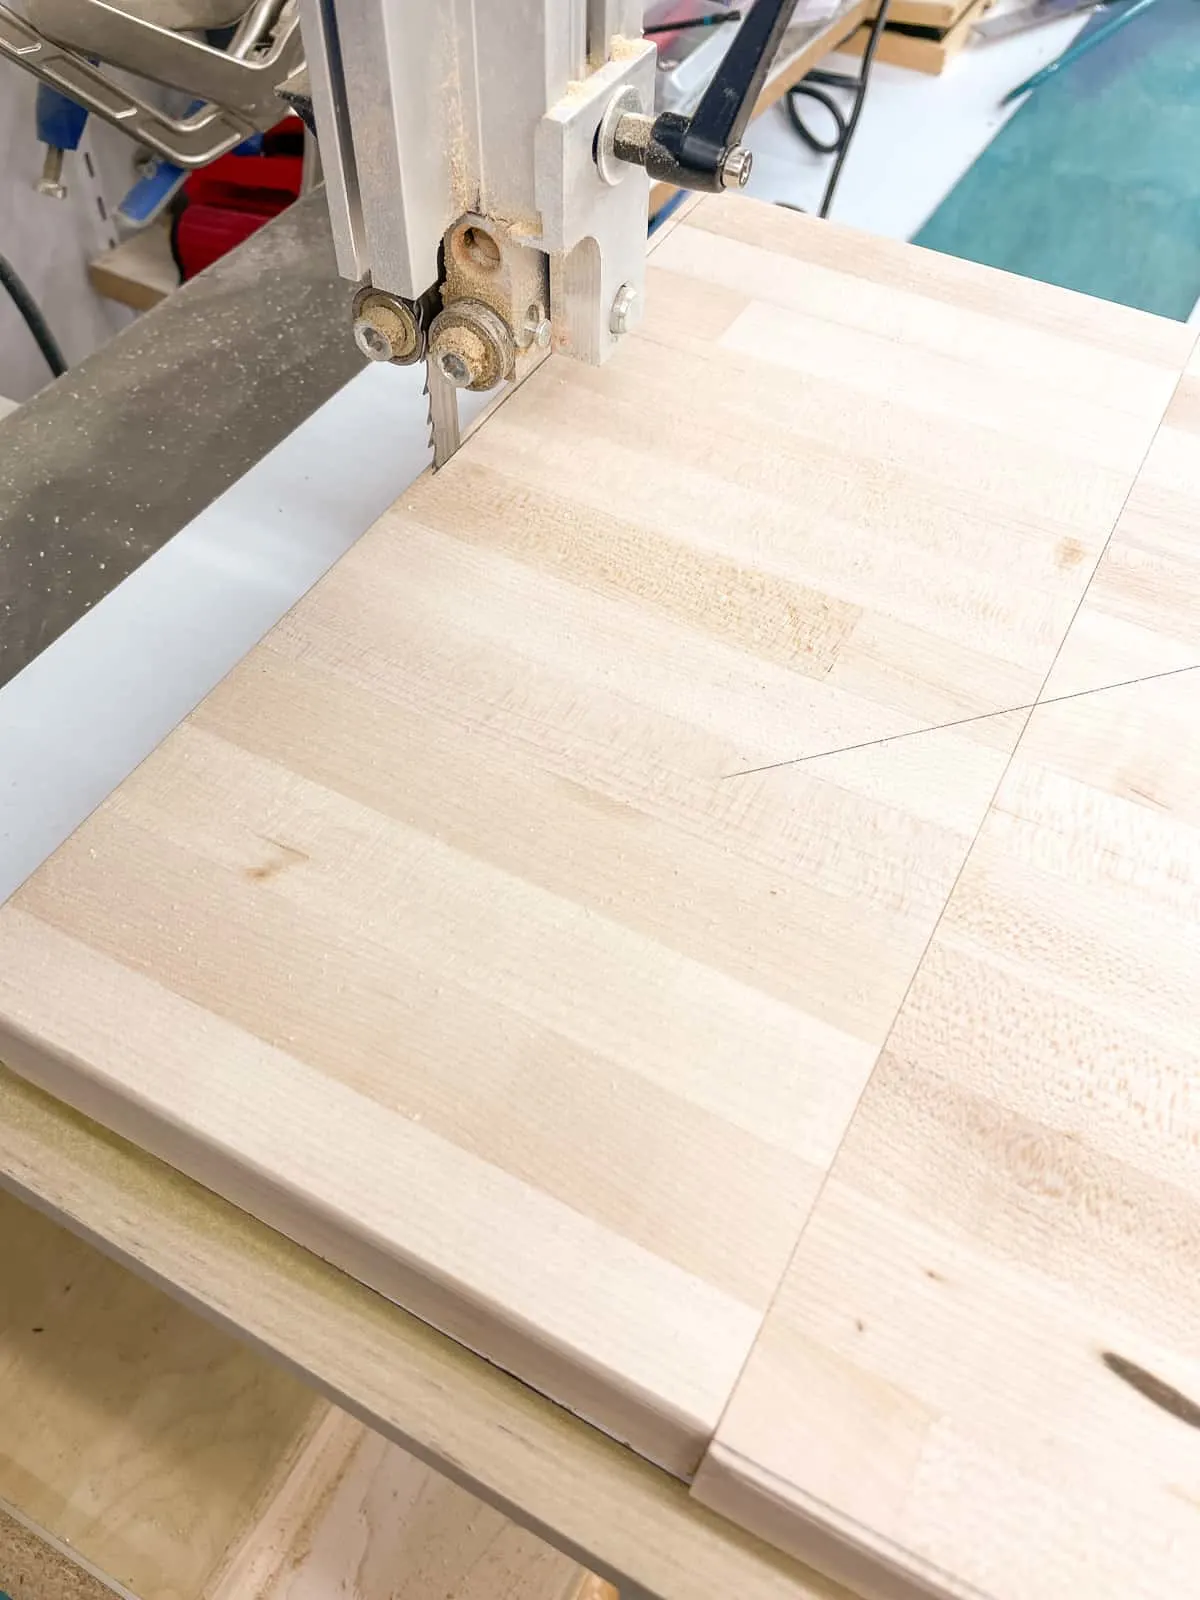 starting the cut with the bandsaw circle cutting jig